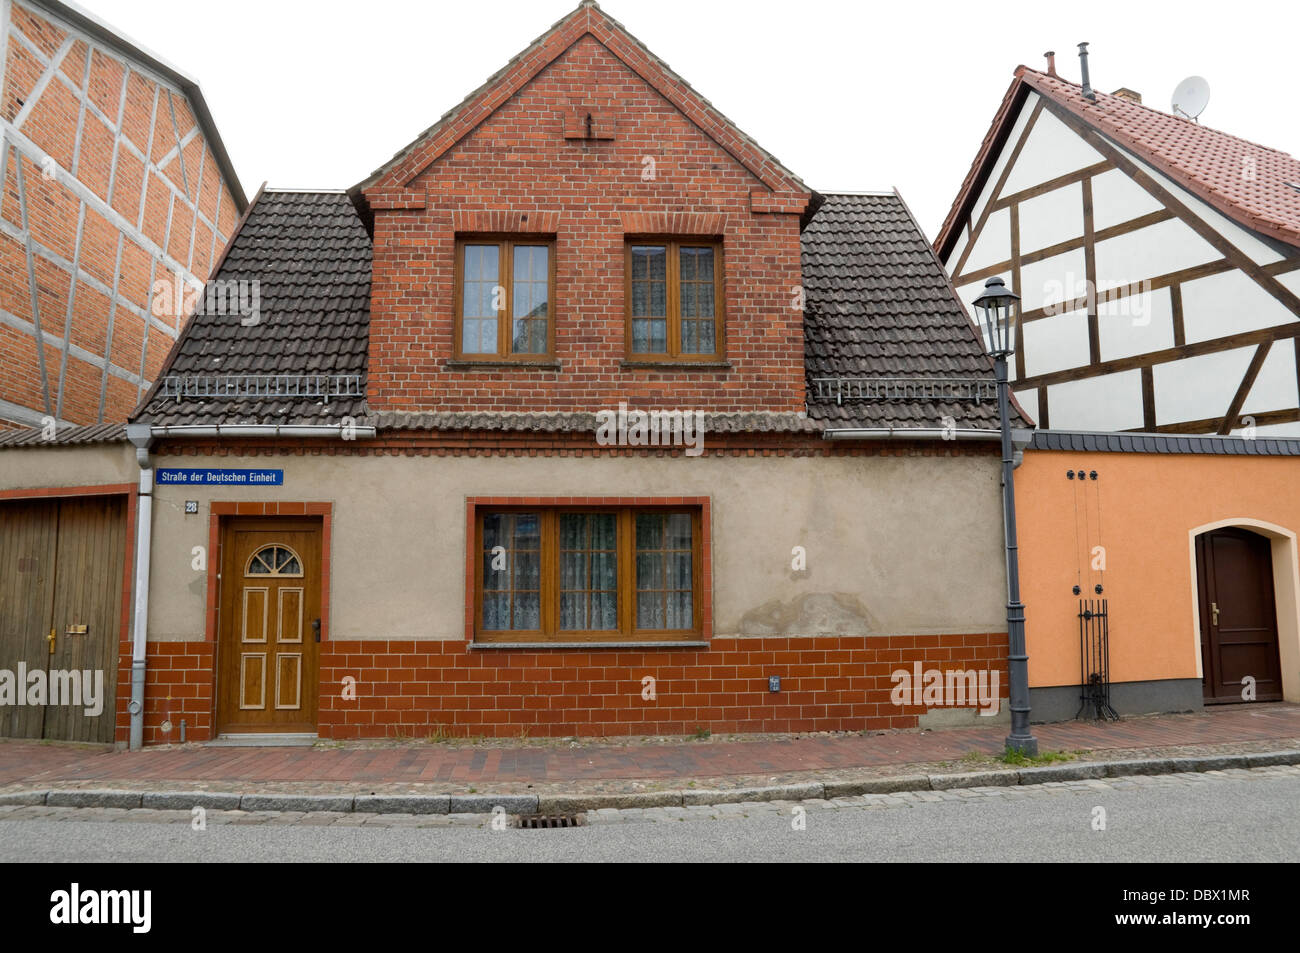 Architecture in the small town of Röbel,  Mecklenburg-Western Pomerania Germany Stock Photo